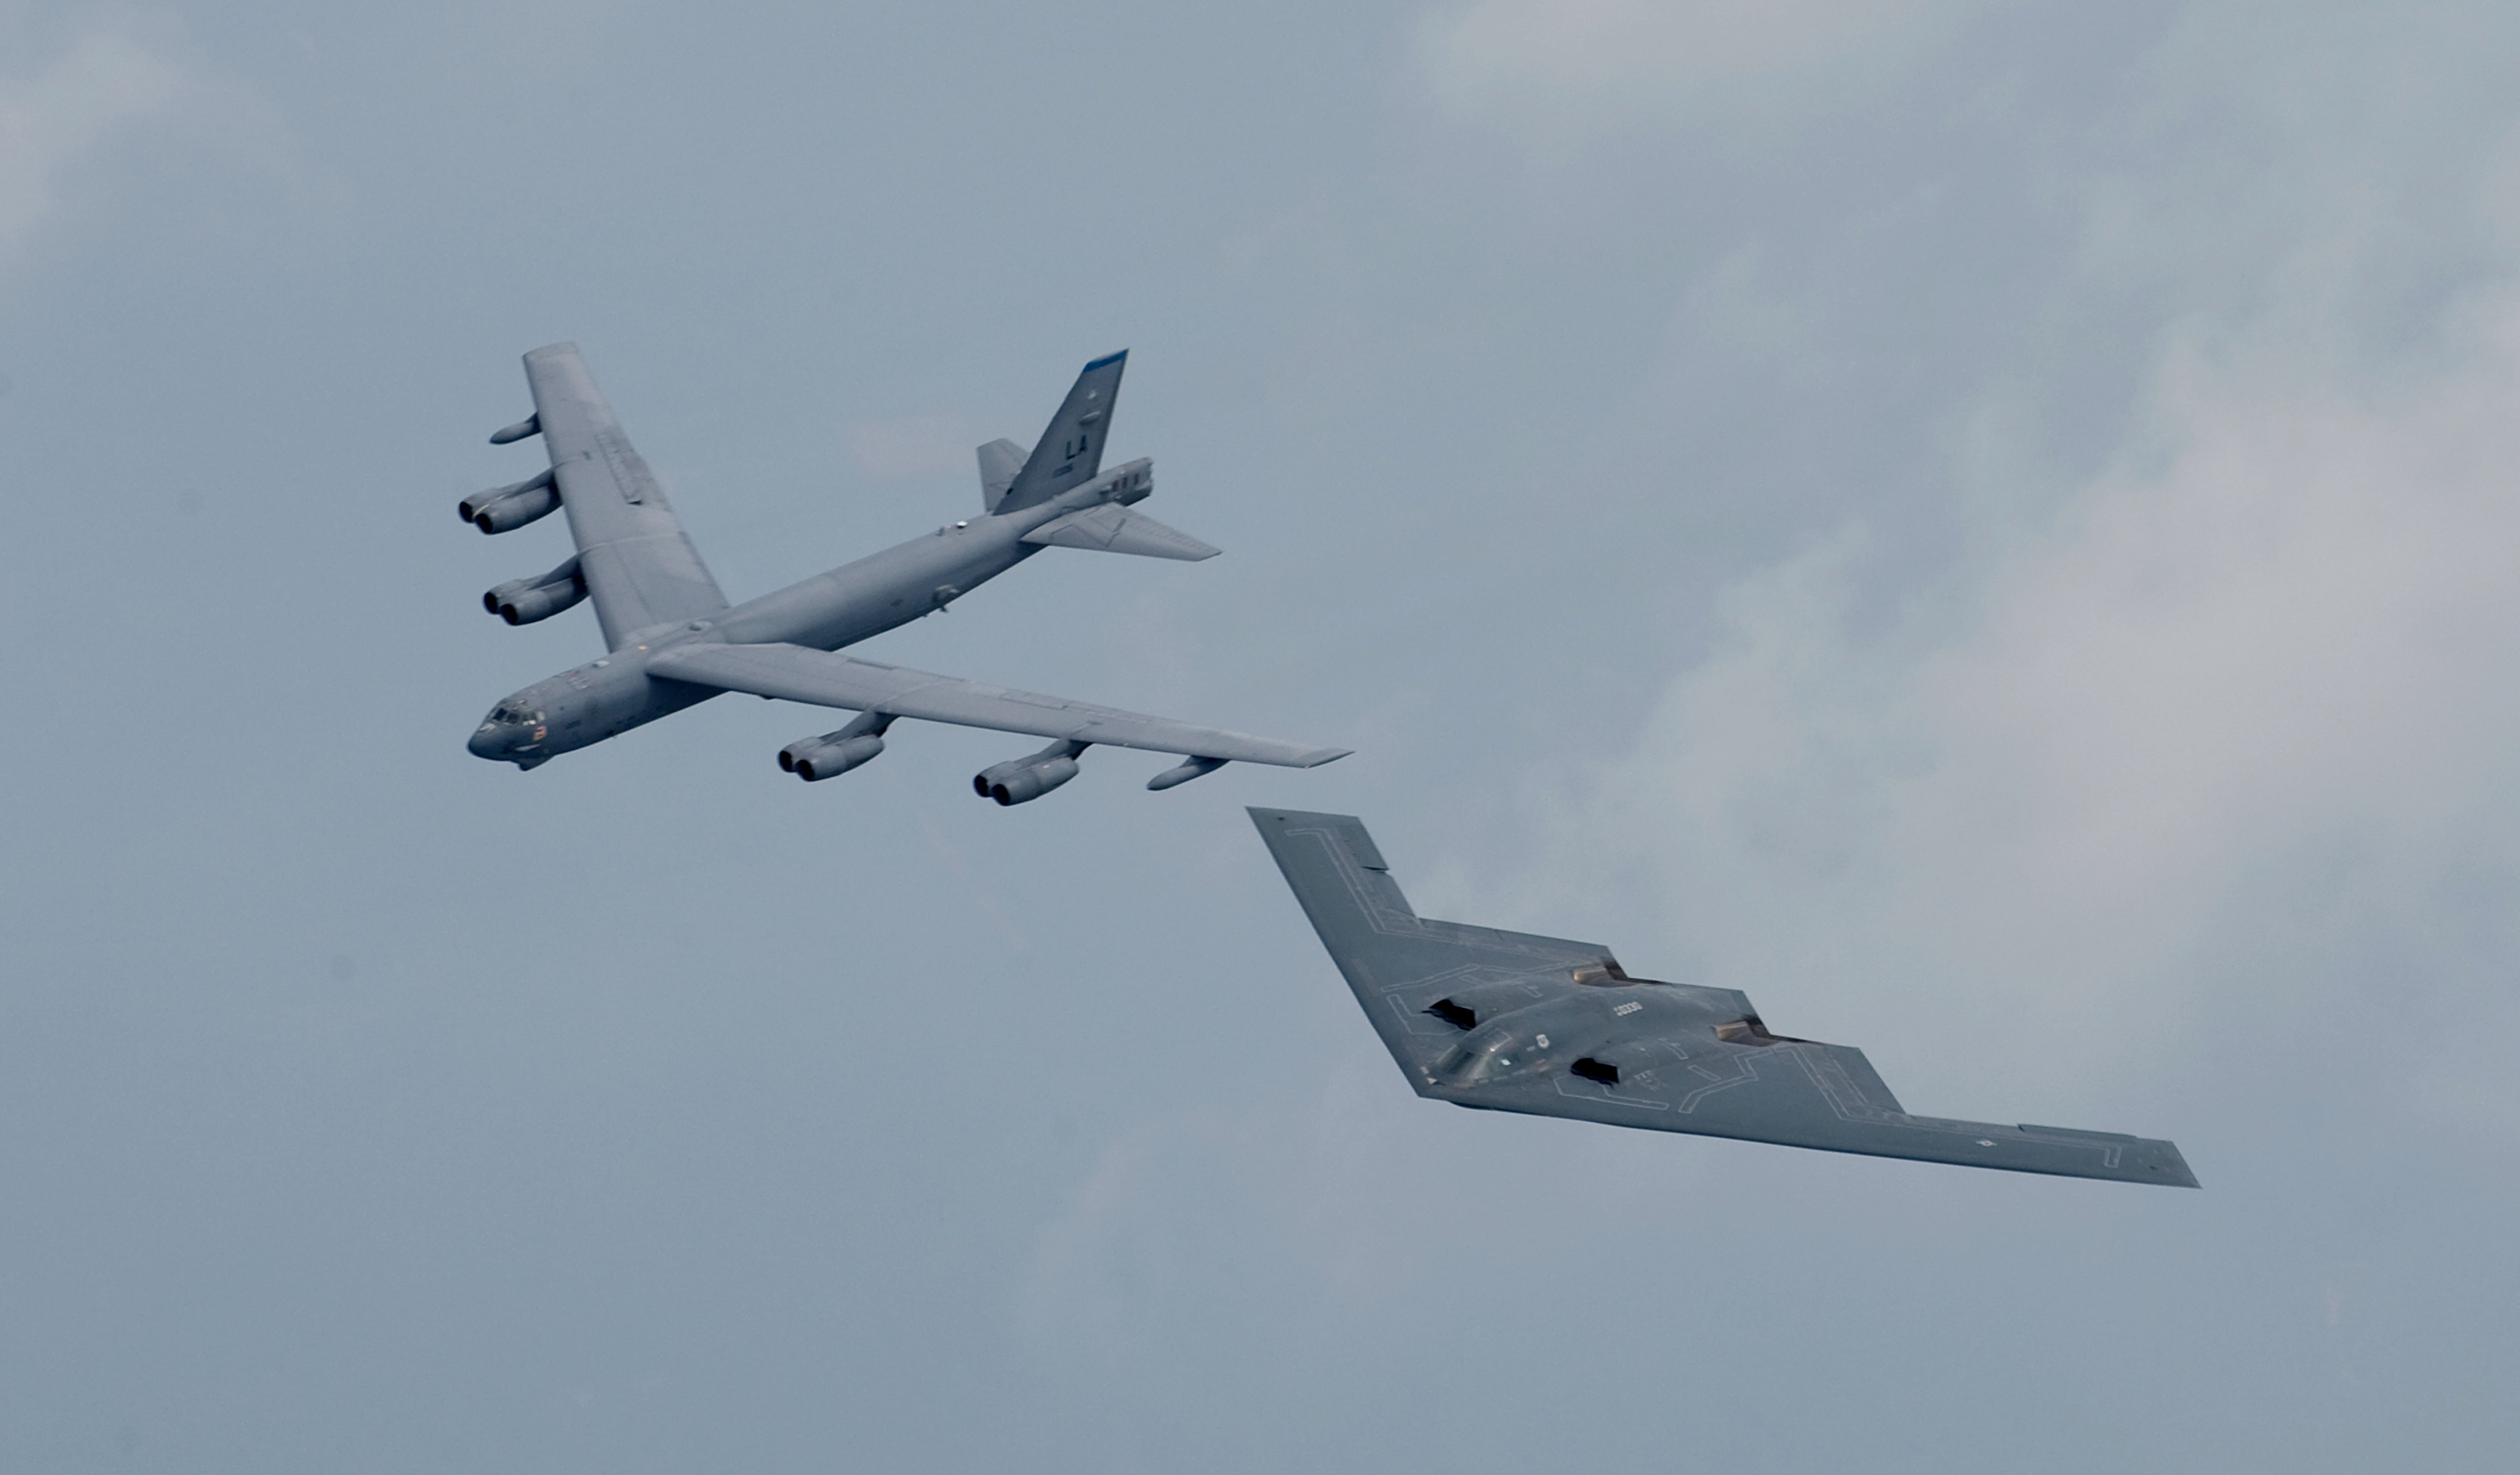 A B-2 Spirit Bomber flying in formation with a B-52.